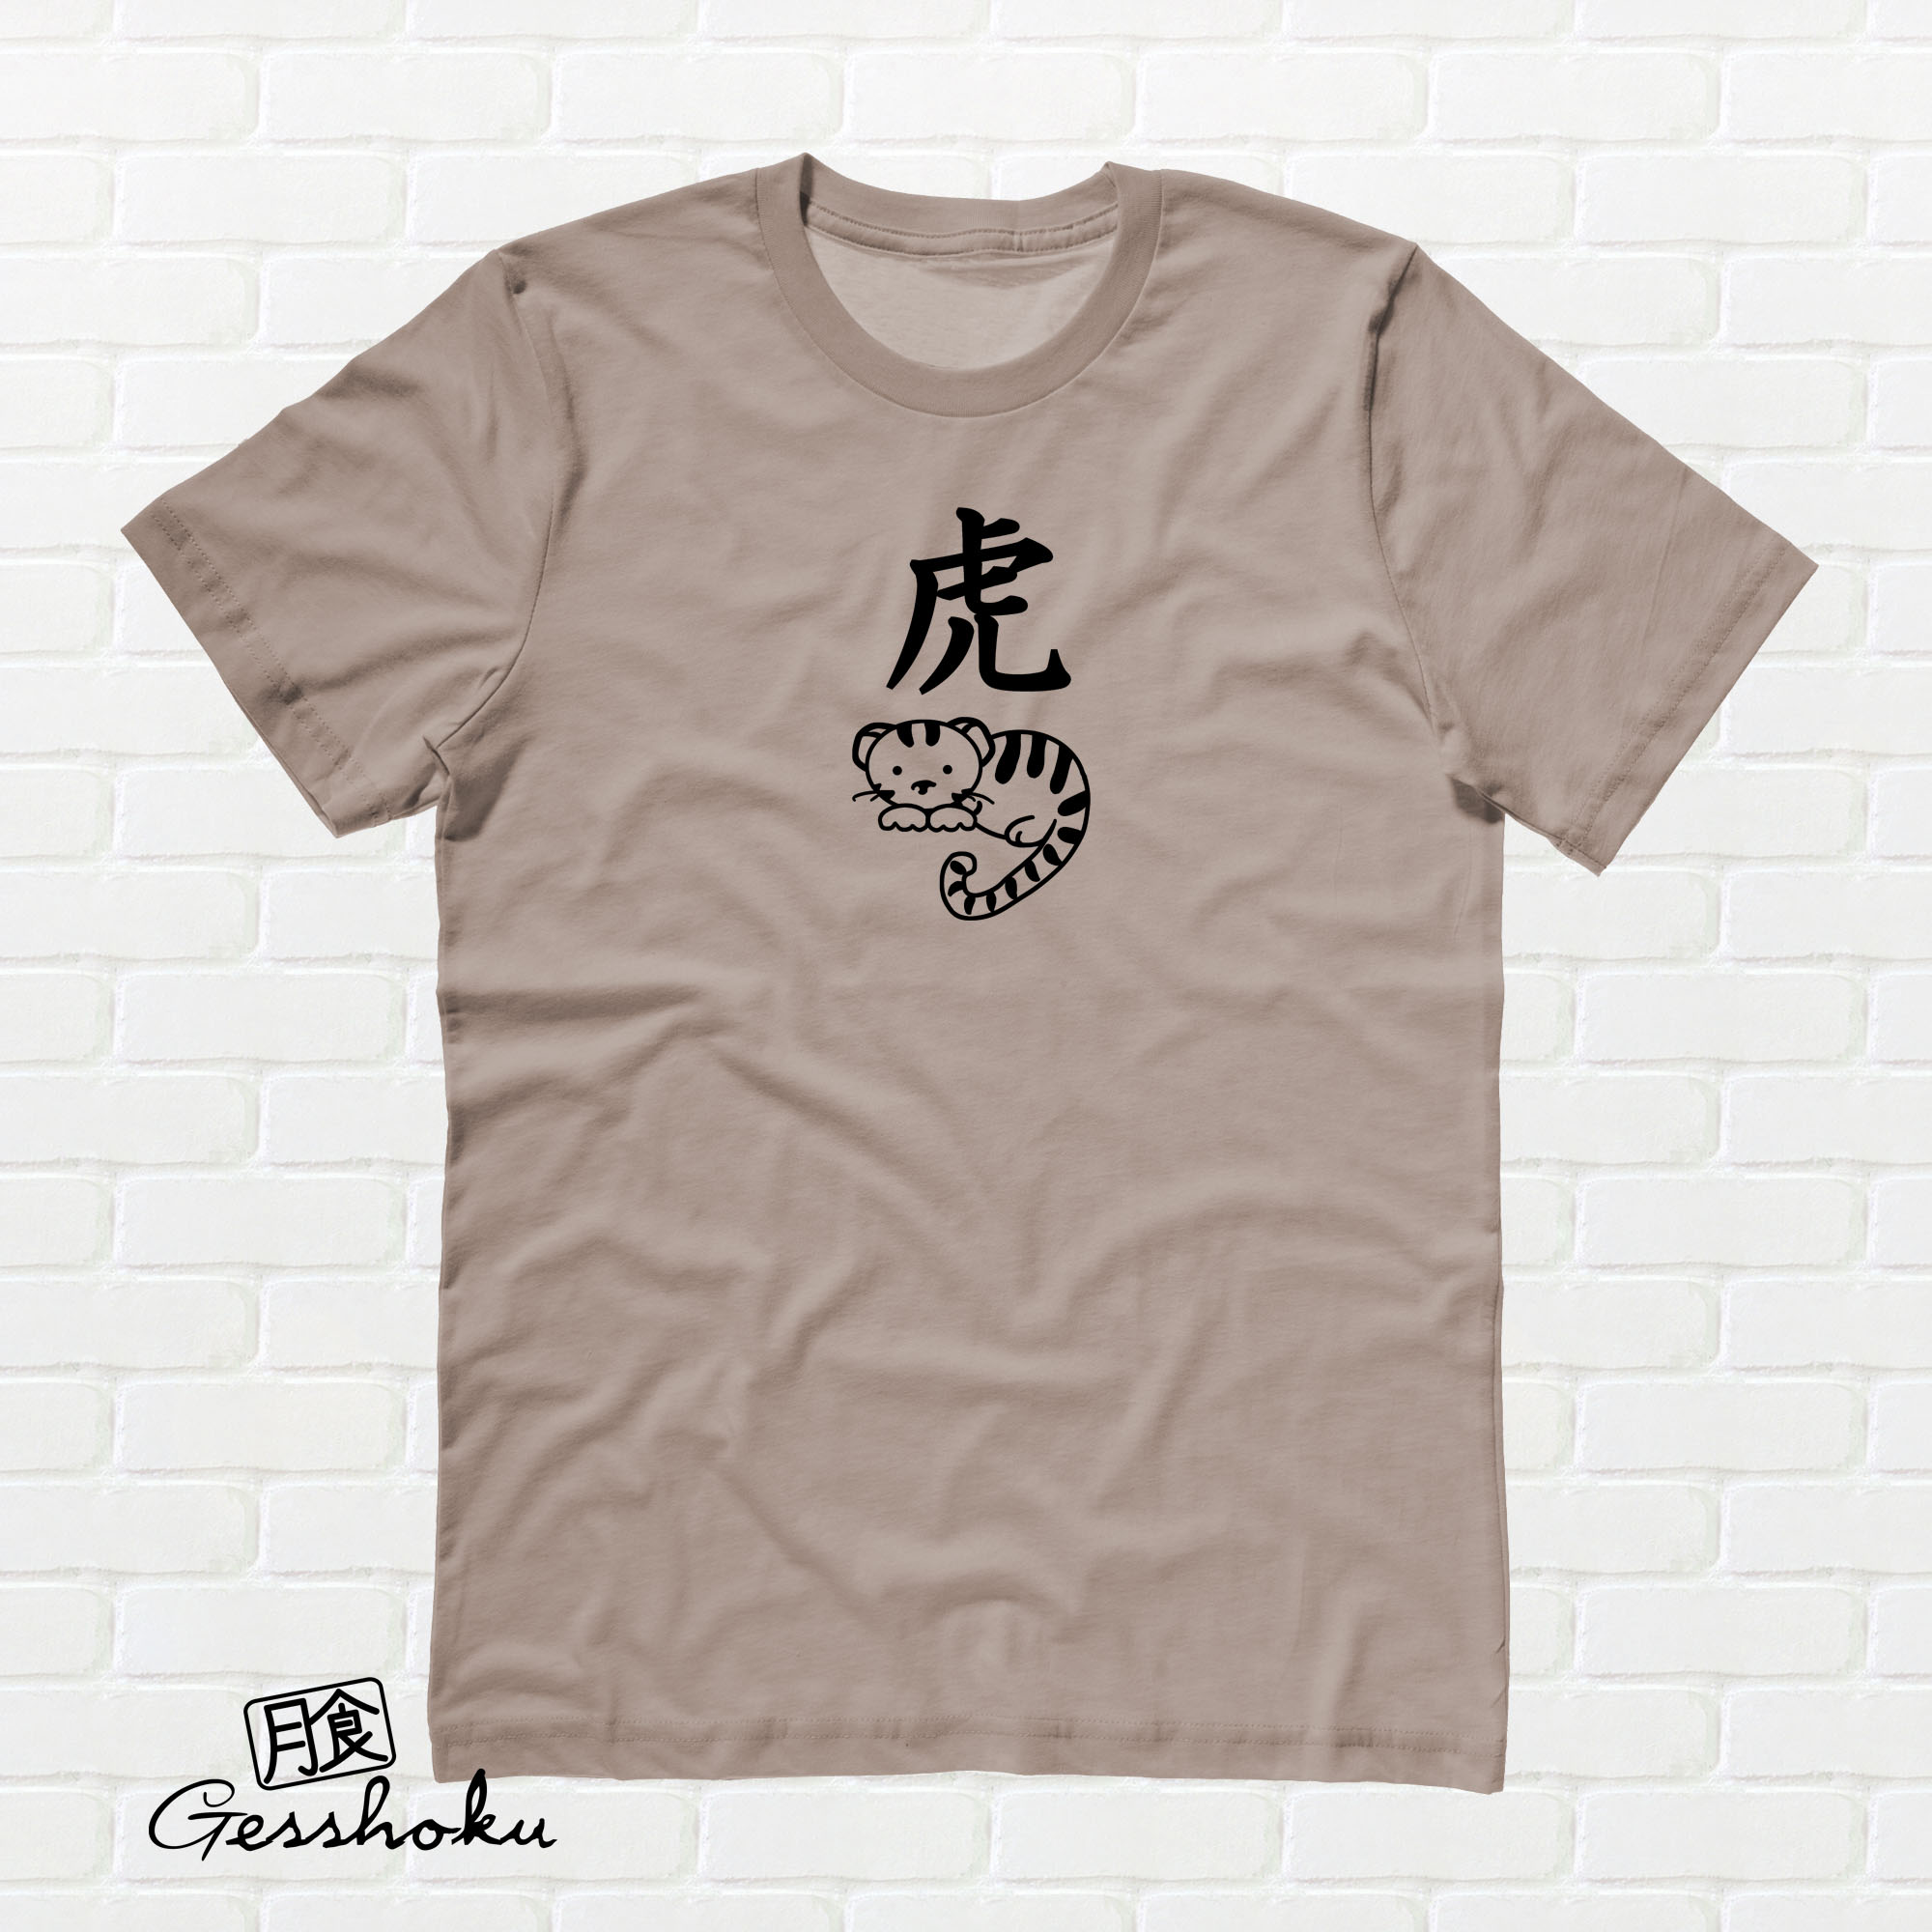 Year of the Tiger Chinese Zodiac T-shirt - Brown